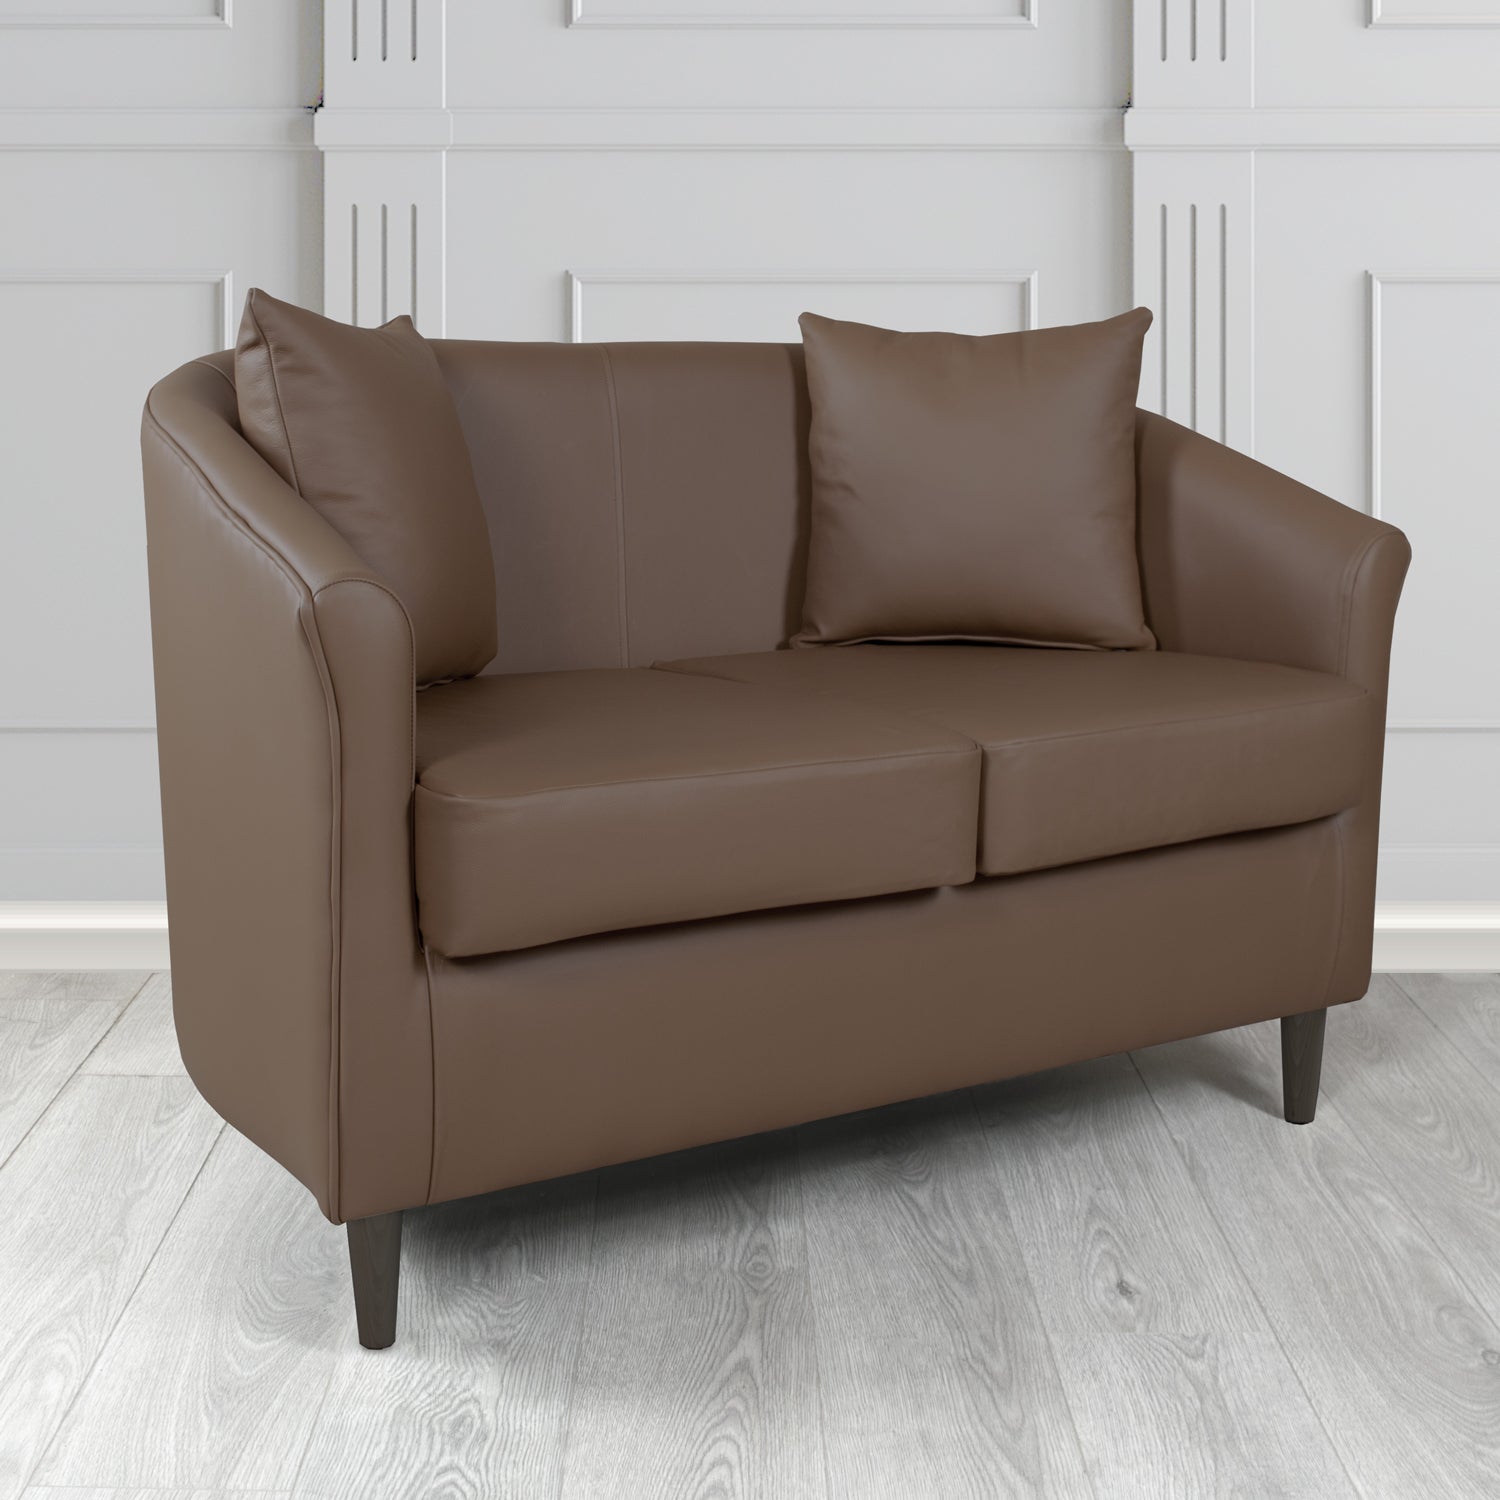 St Tropez Shelly Dark Chocolate Crib 5 Genuine Leather 2 Seater Tub Sofa with Scatter Cushions - The Tub Chair Shop